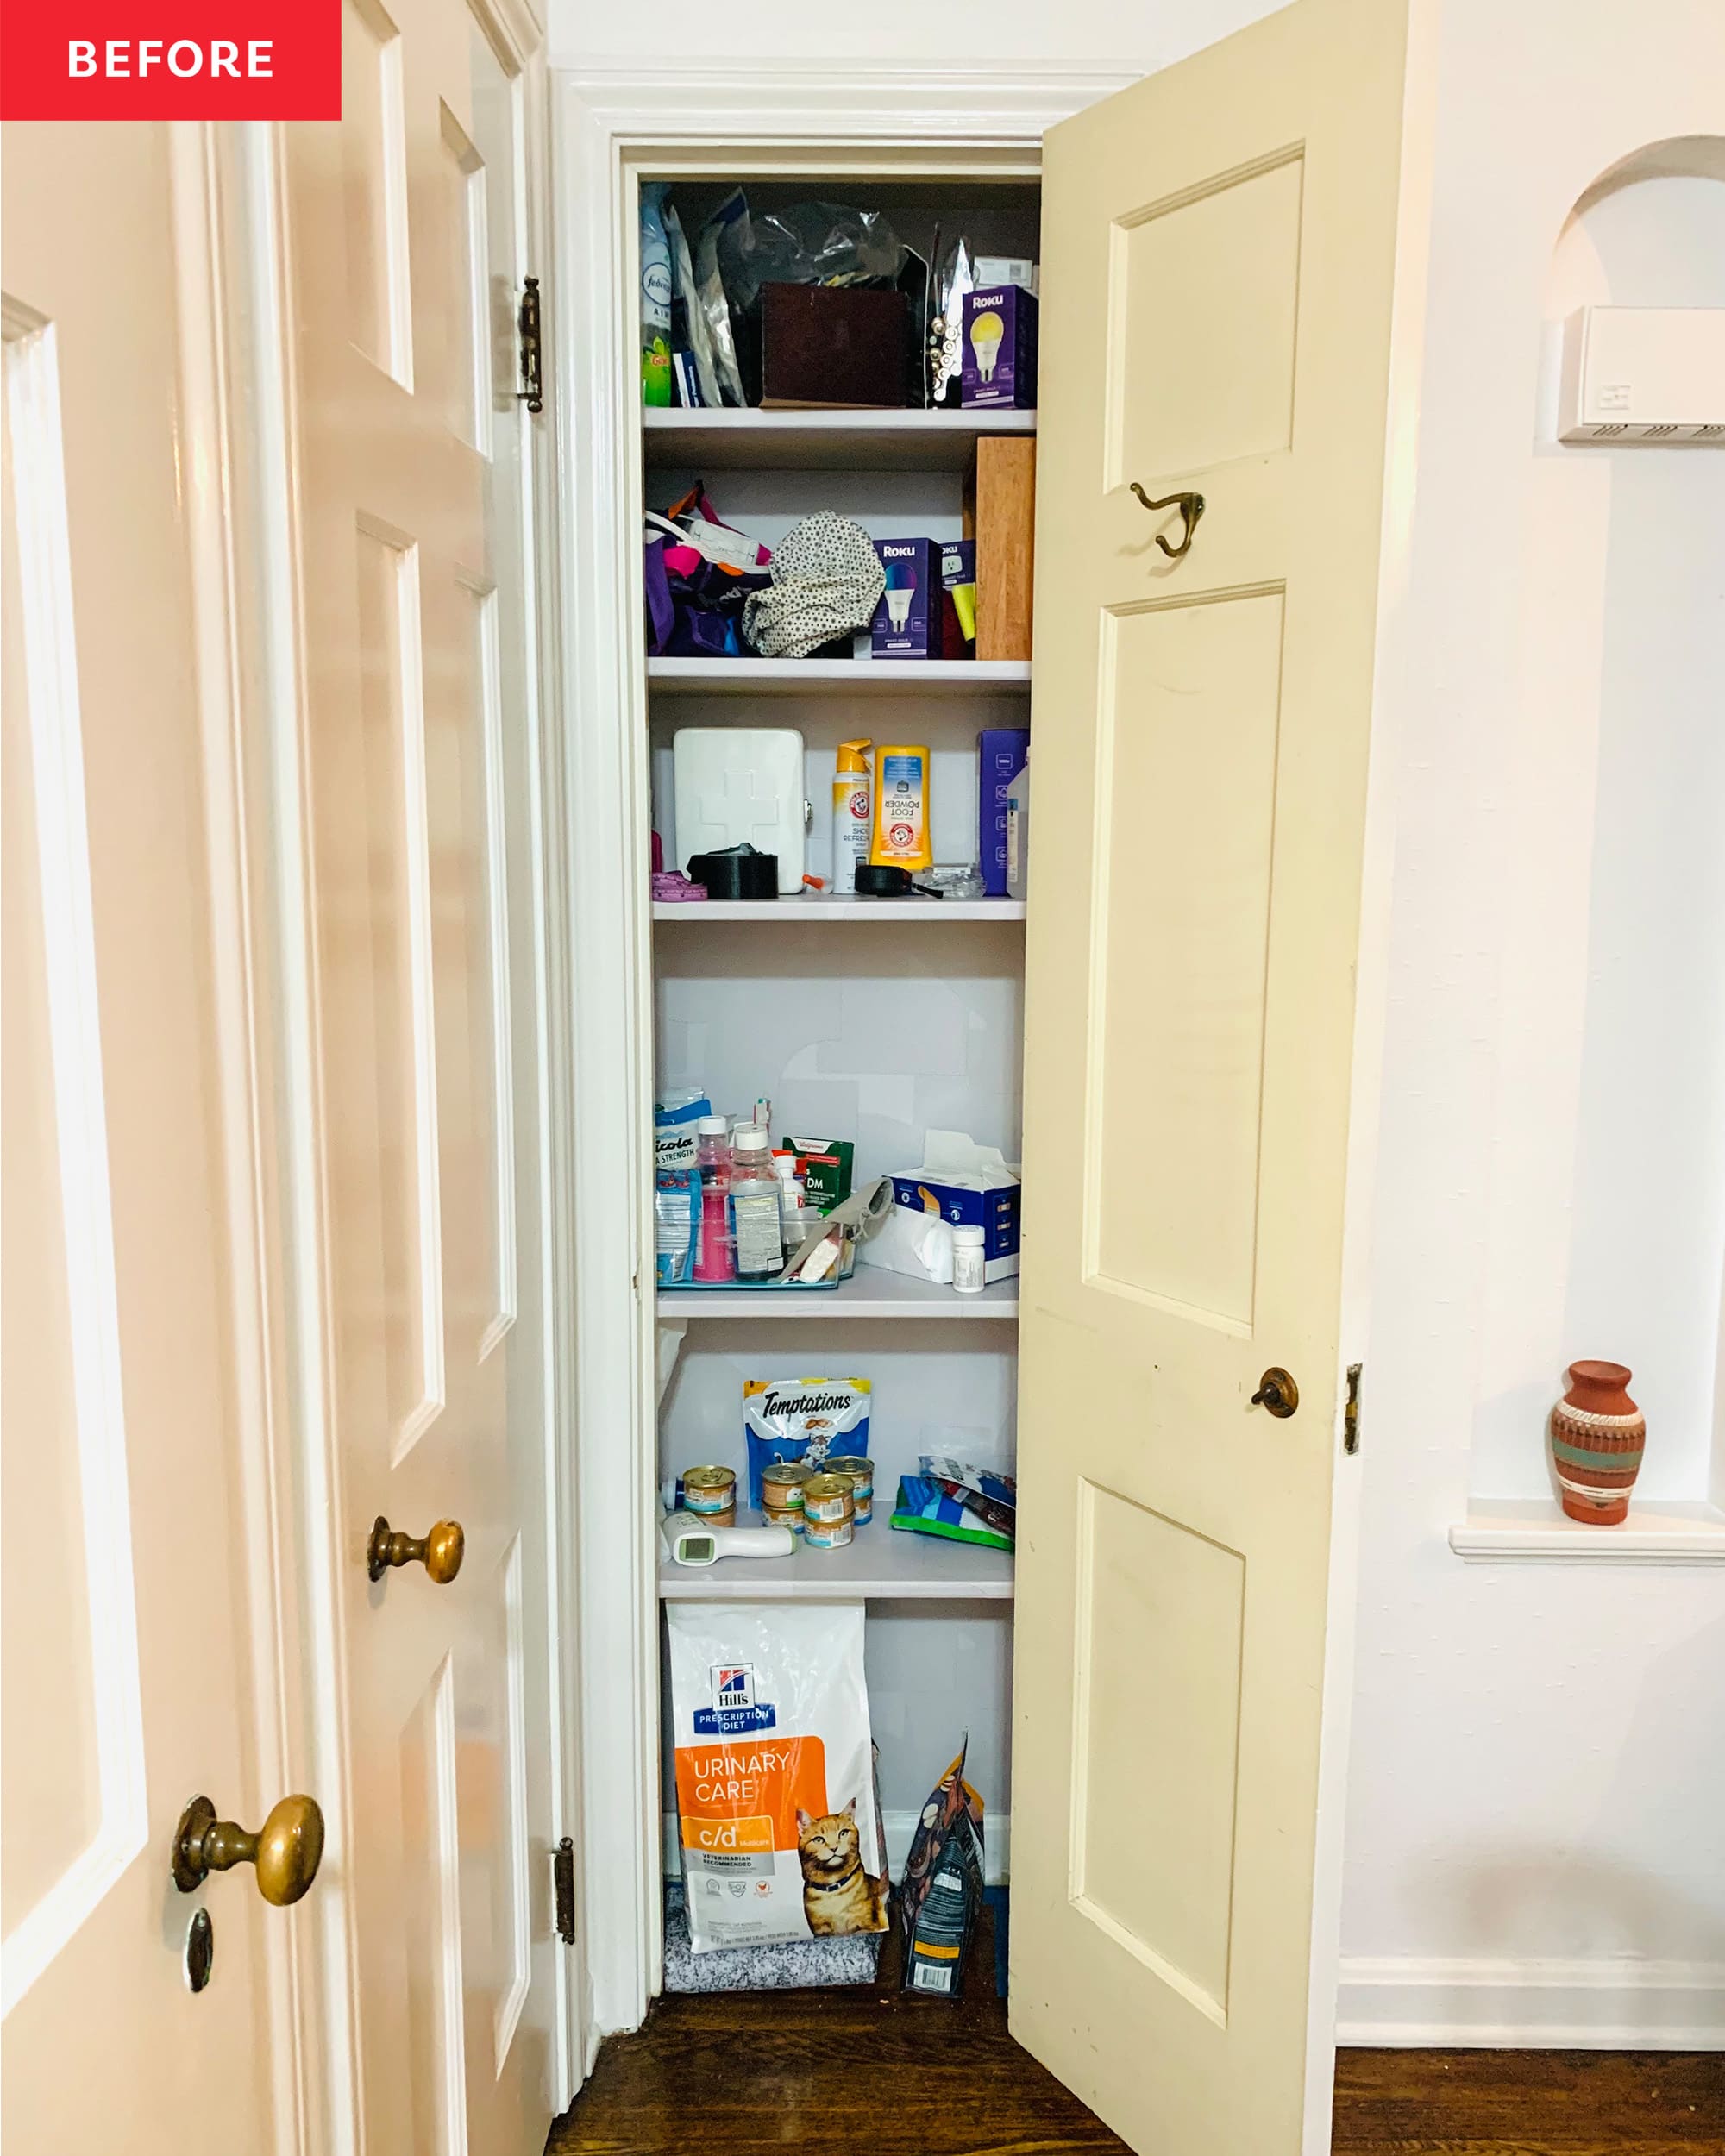 https://cdn.apartmenttherapy.info/image/upload/v1685640821/at/organize-clean/before-after/pro-organizer-hallway-closet/hallway-closet-before-1-tag.jpg